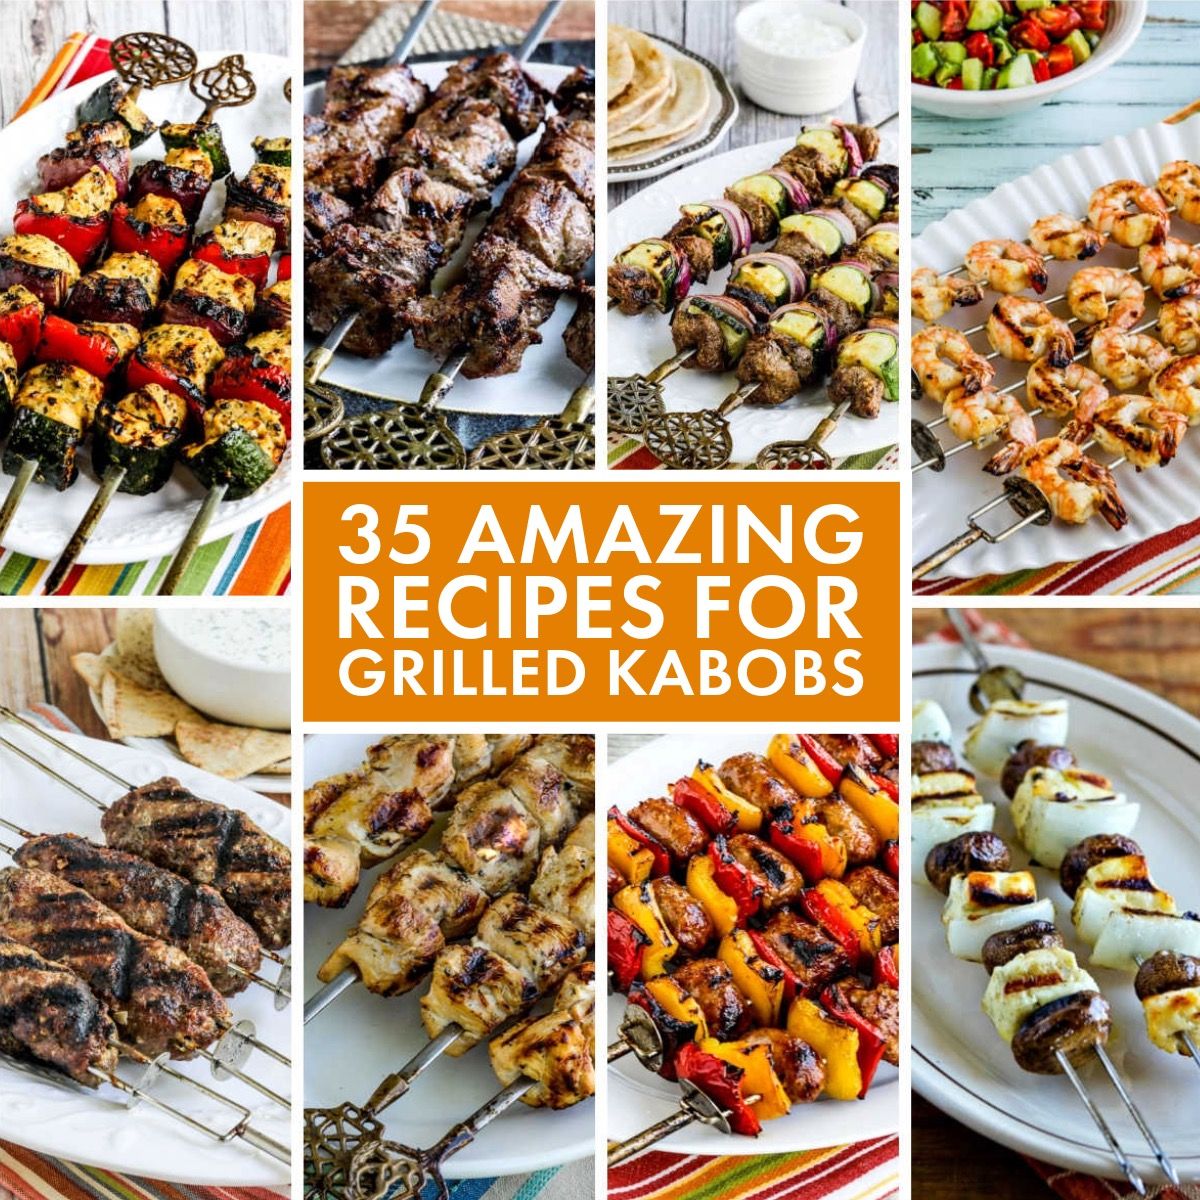 35 Amazing Recipes for Grilled Kabobs collage photo showing featured recipes.